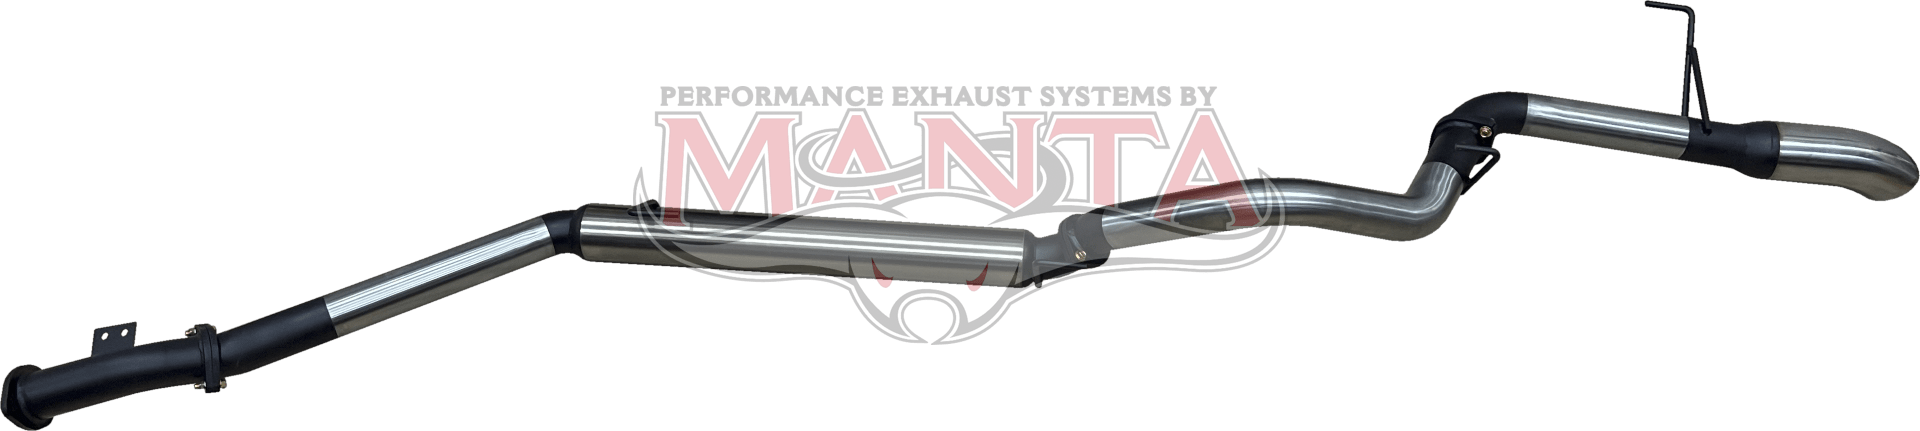 300 Series 3" Stainless Manta Exhaust (With DPF)